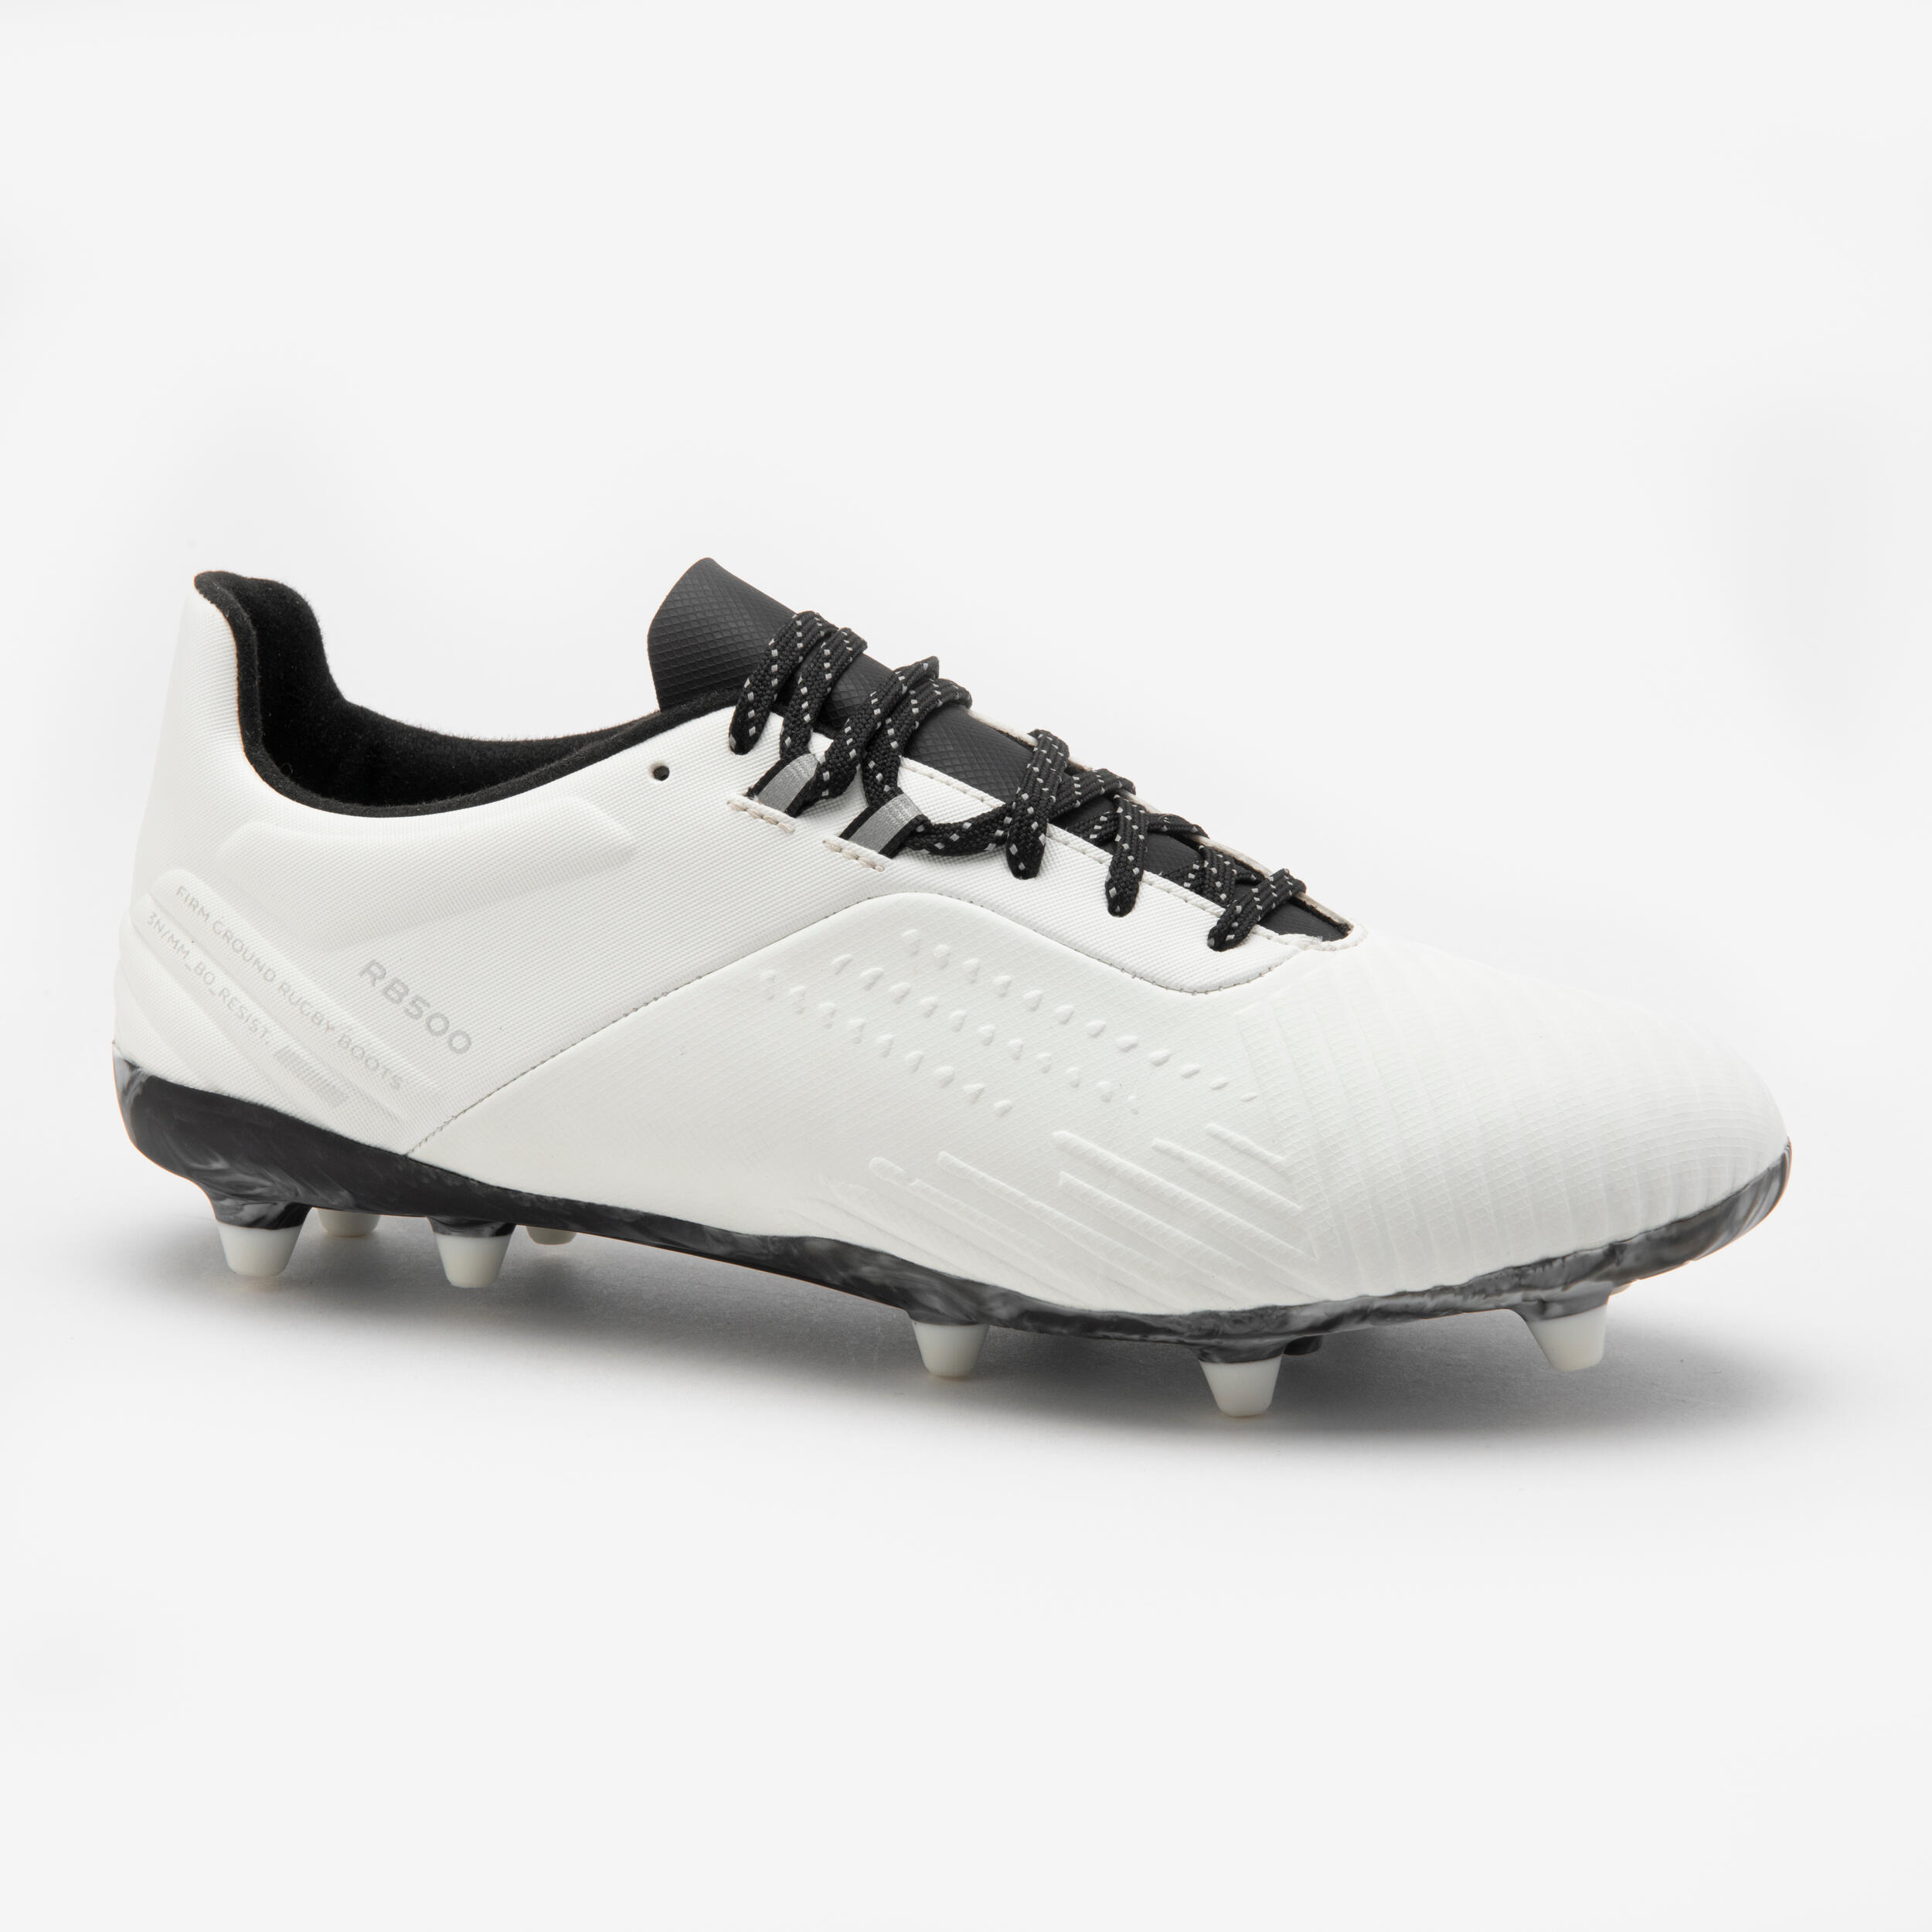 OFFLOAD Adult Rugby Boots Advance R500 FG - Beige